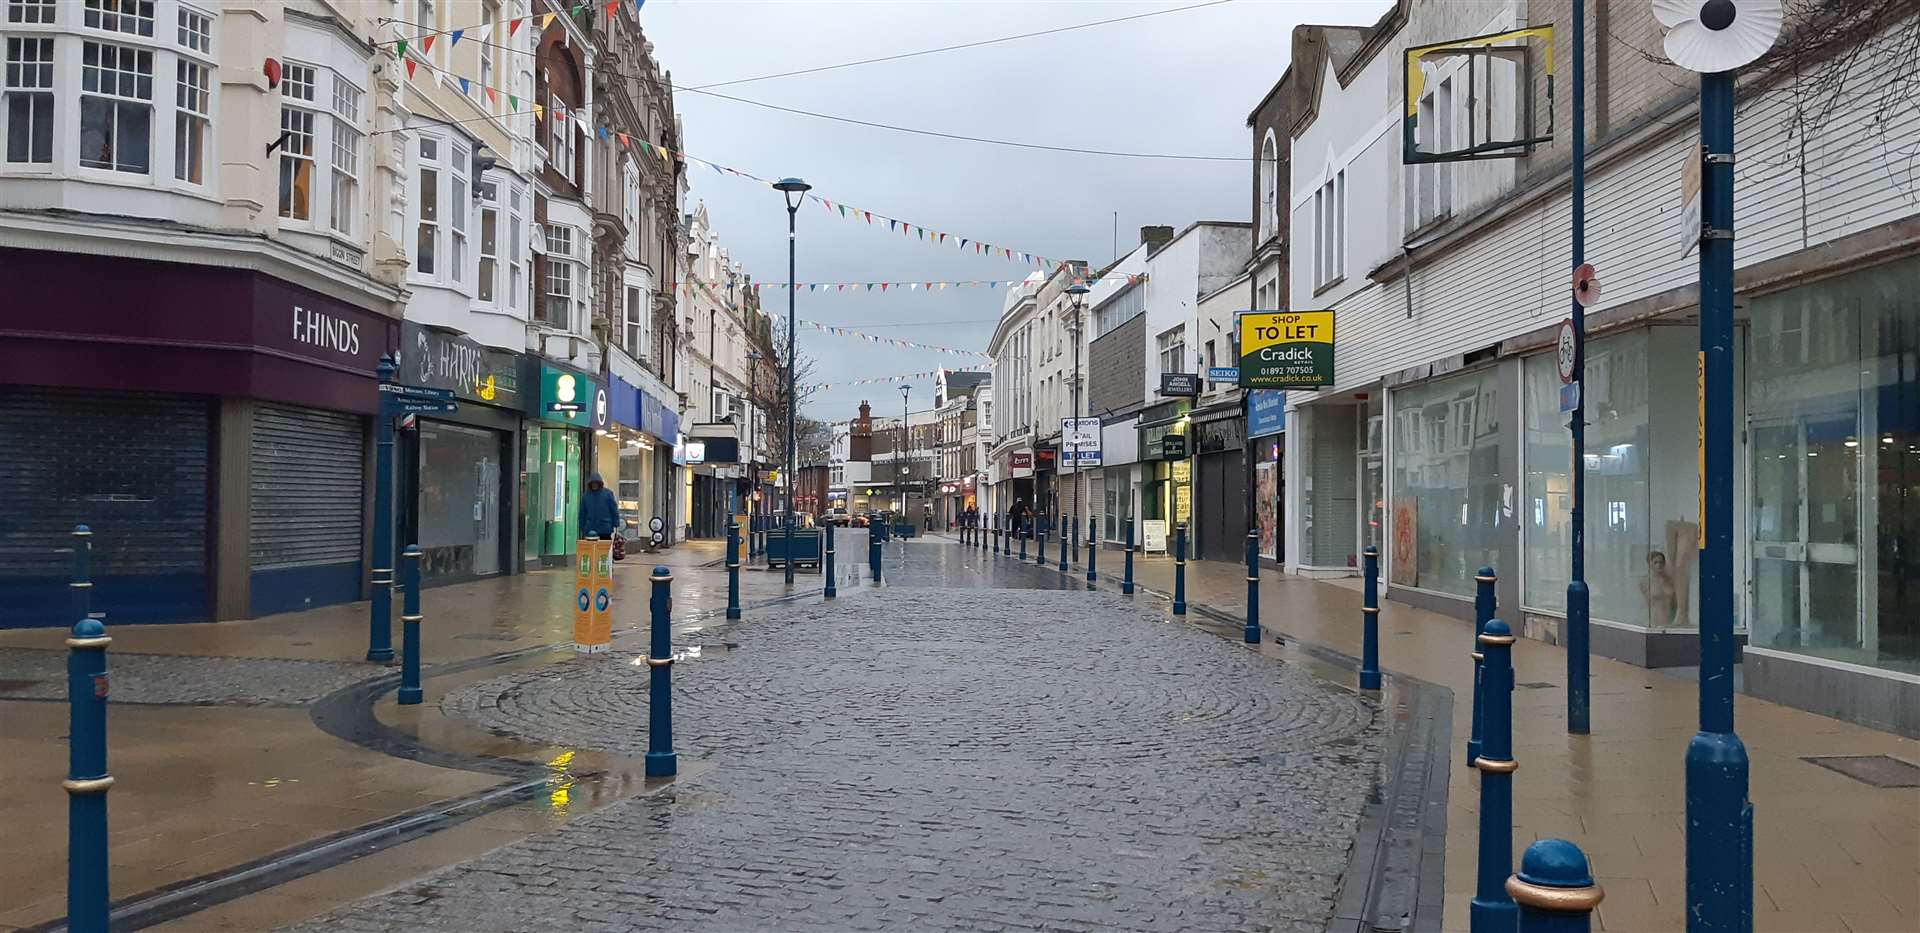 Biggin Street in the town centre, deserted during this year's pandemic lockdown.